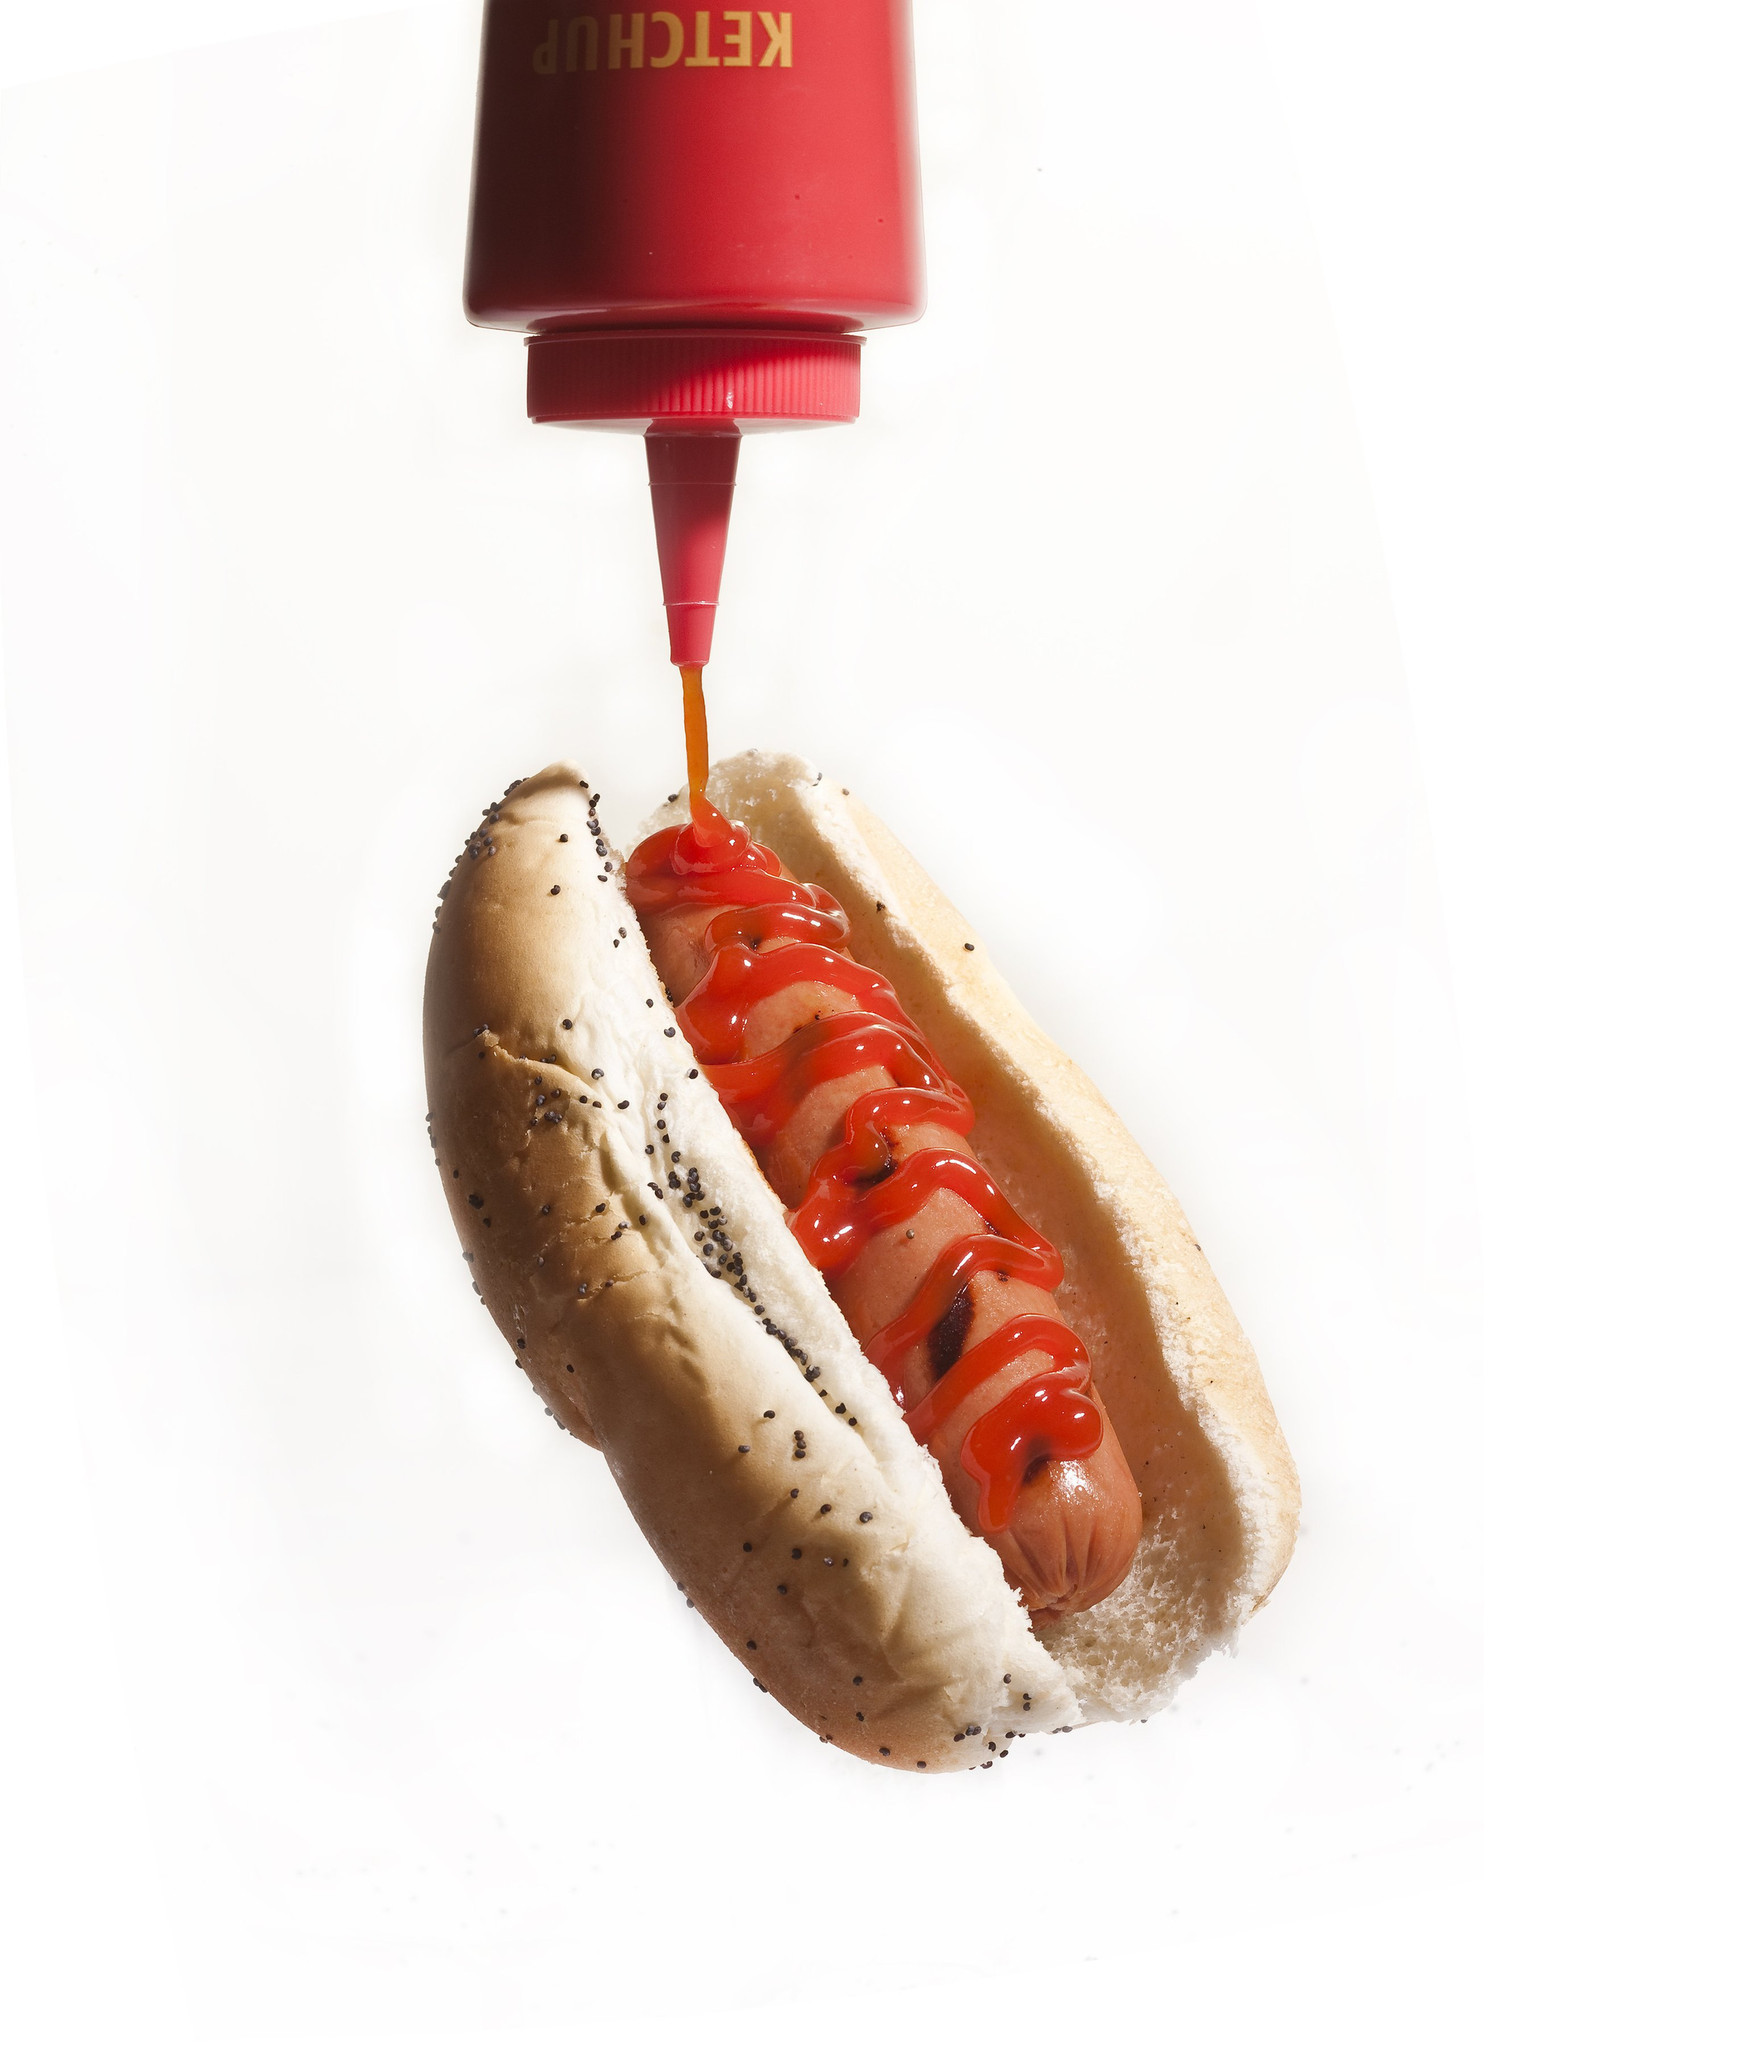 Florida woman stripped, poured ketchup on herself at diner - Chicago ...